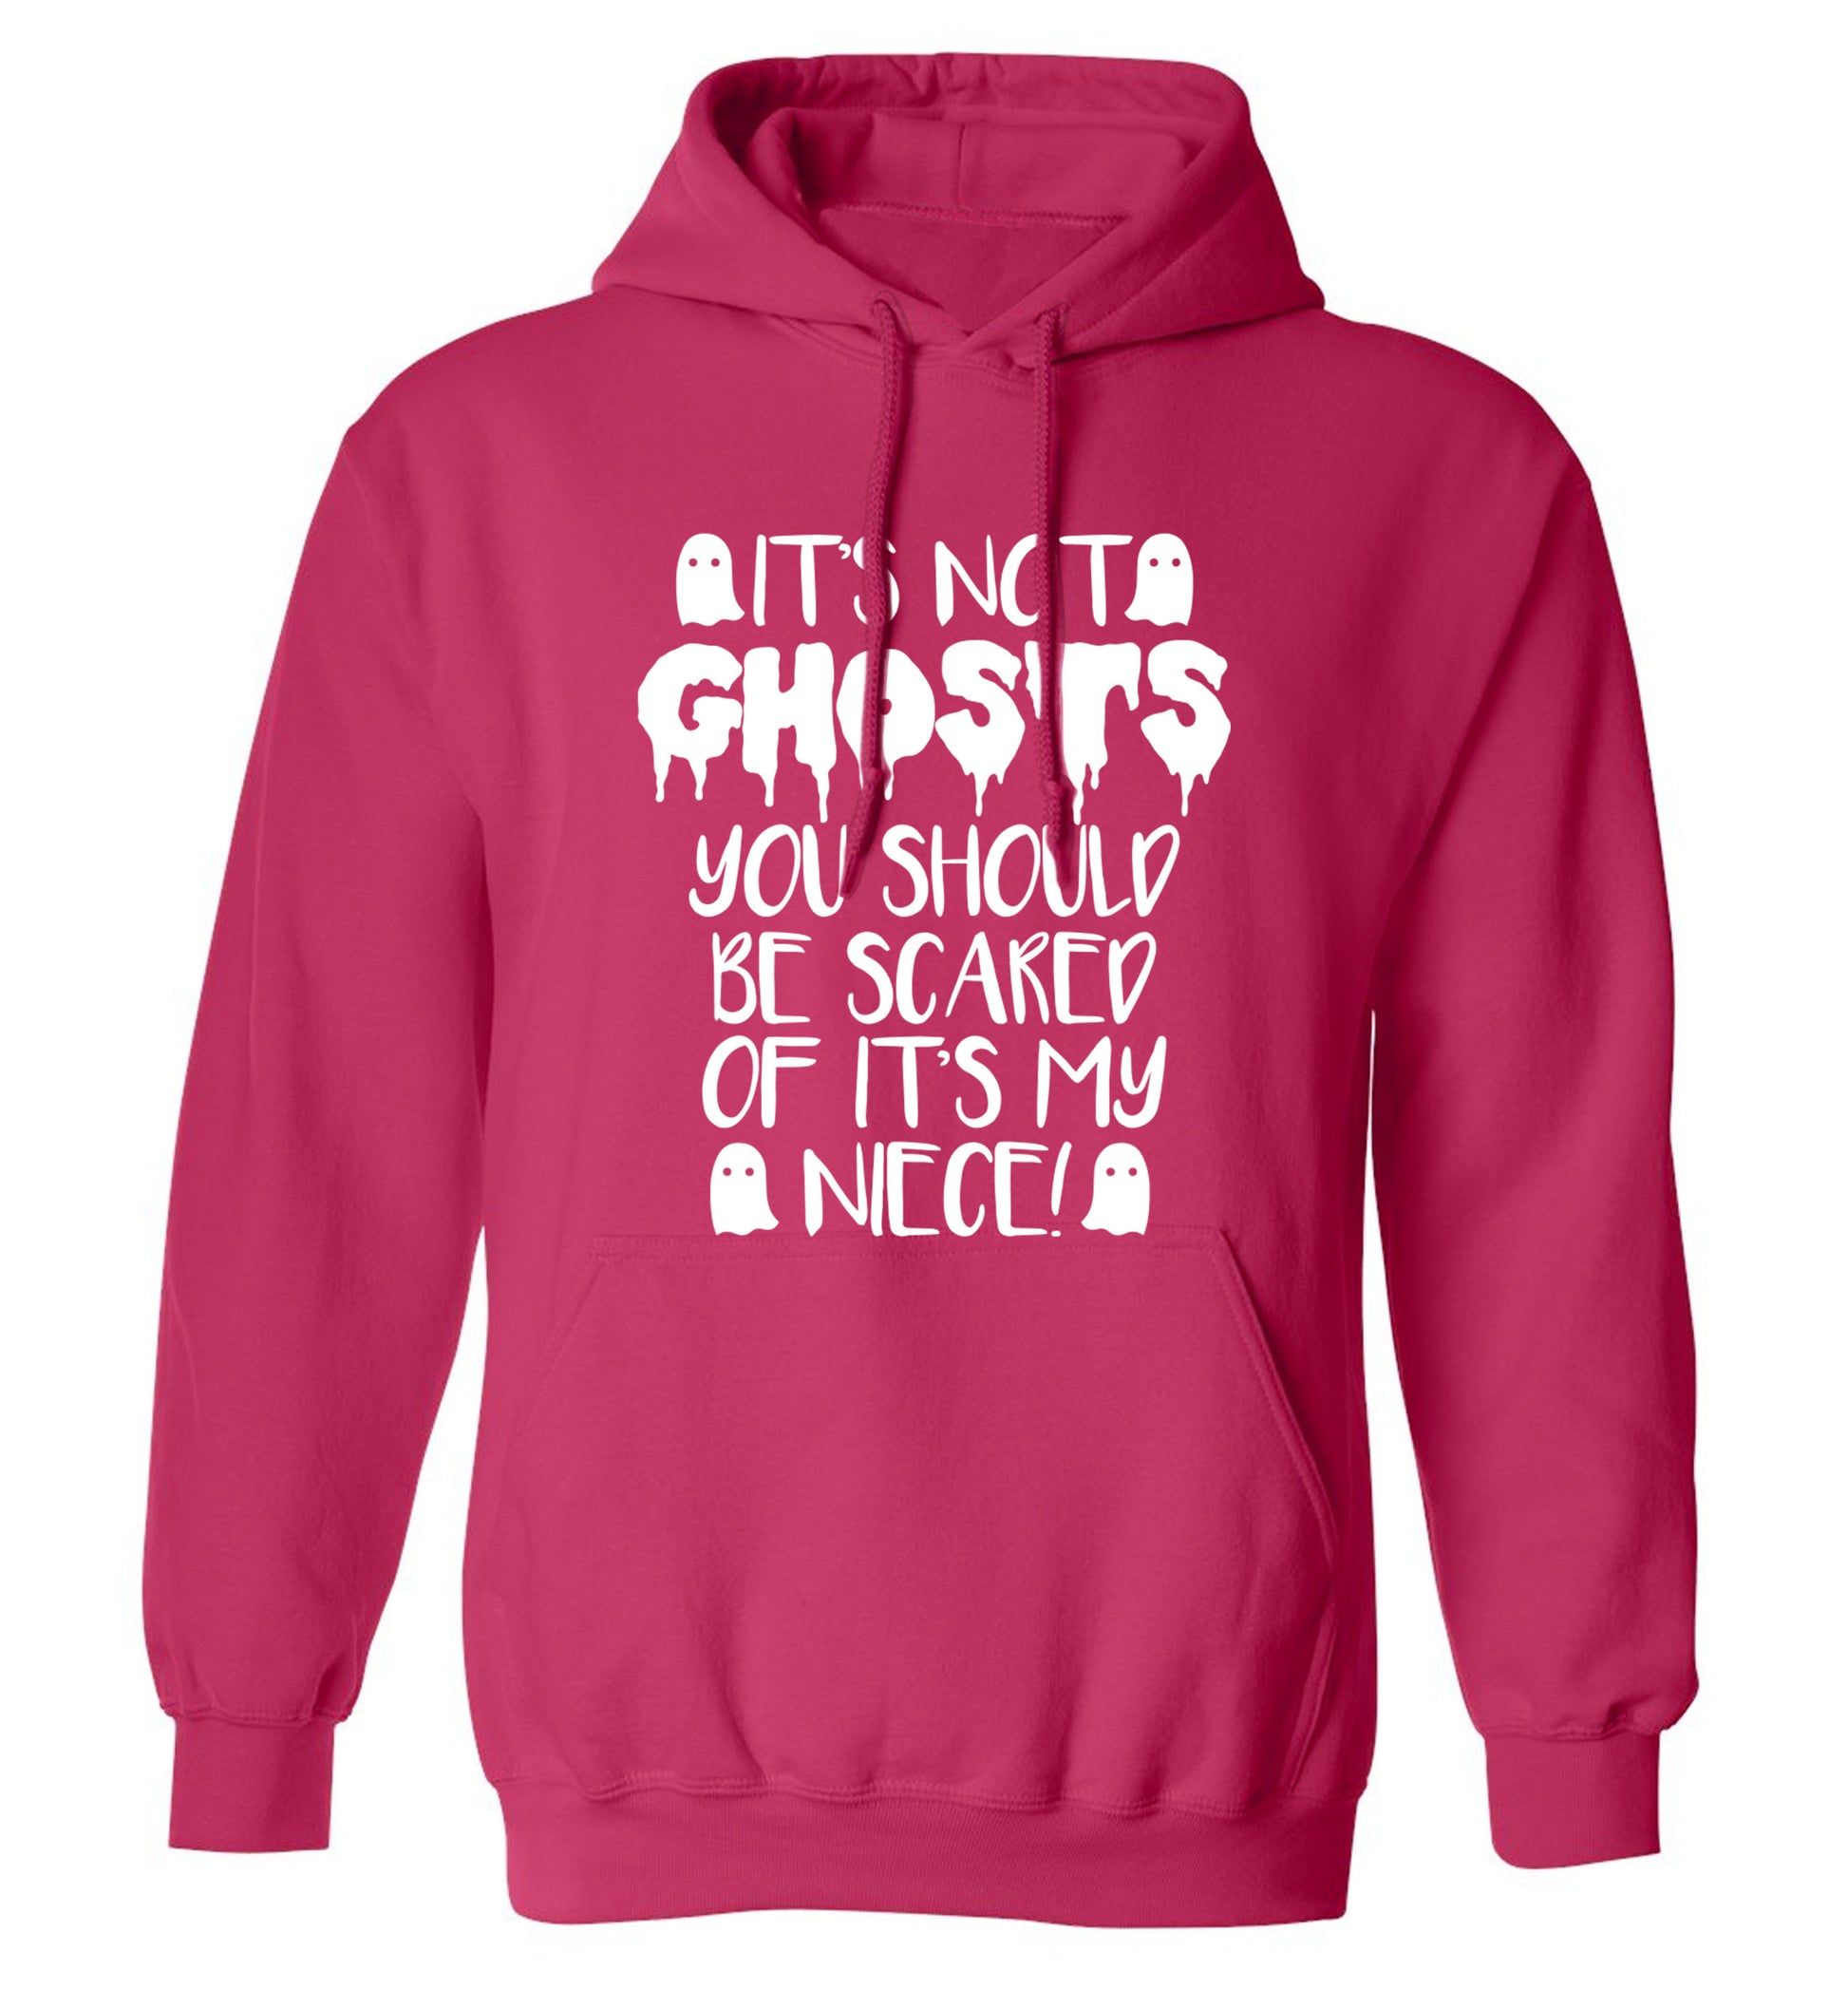 It's not ghosts you should be scared of it's my niece! adults unisex pink hoodie 2XL